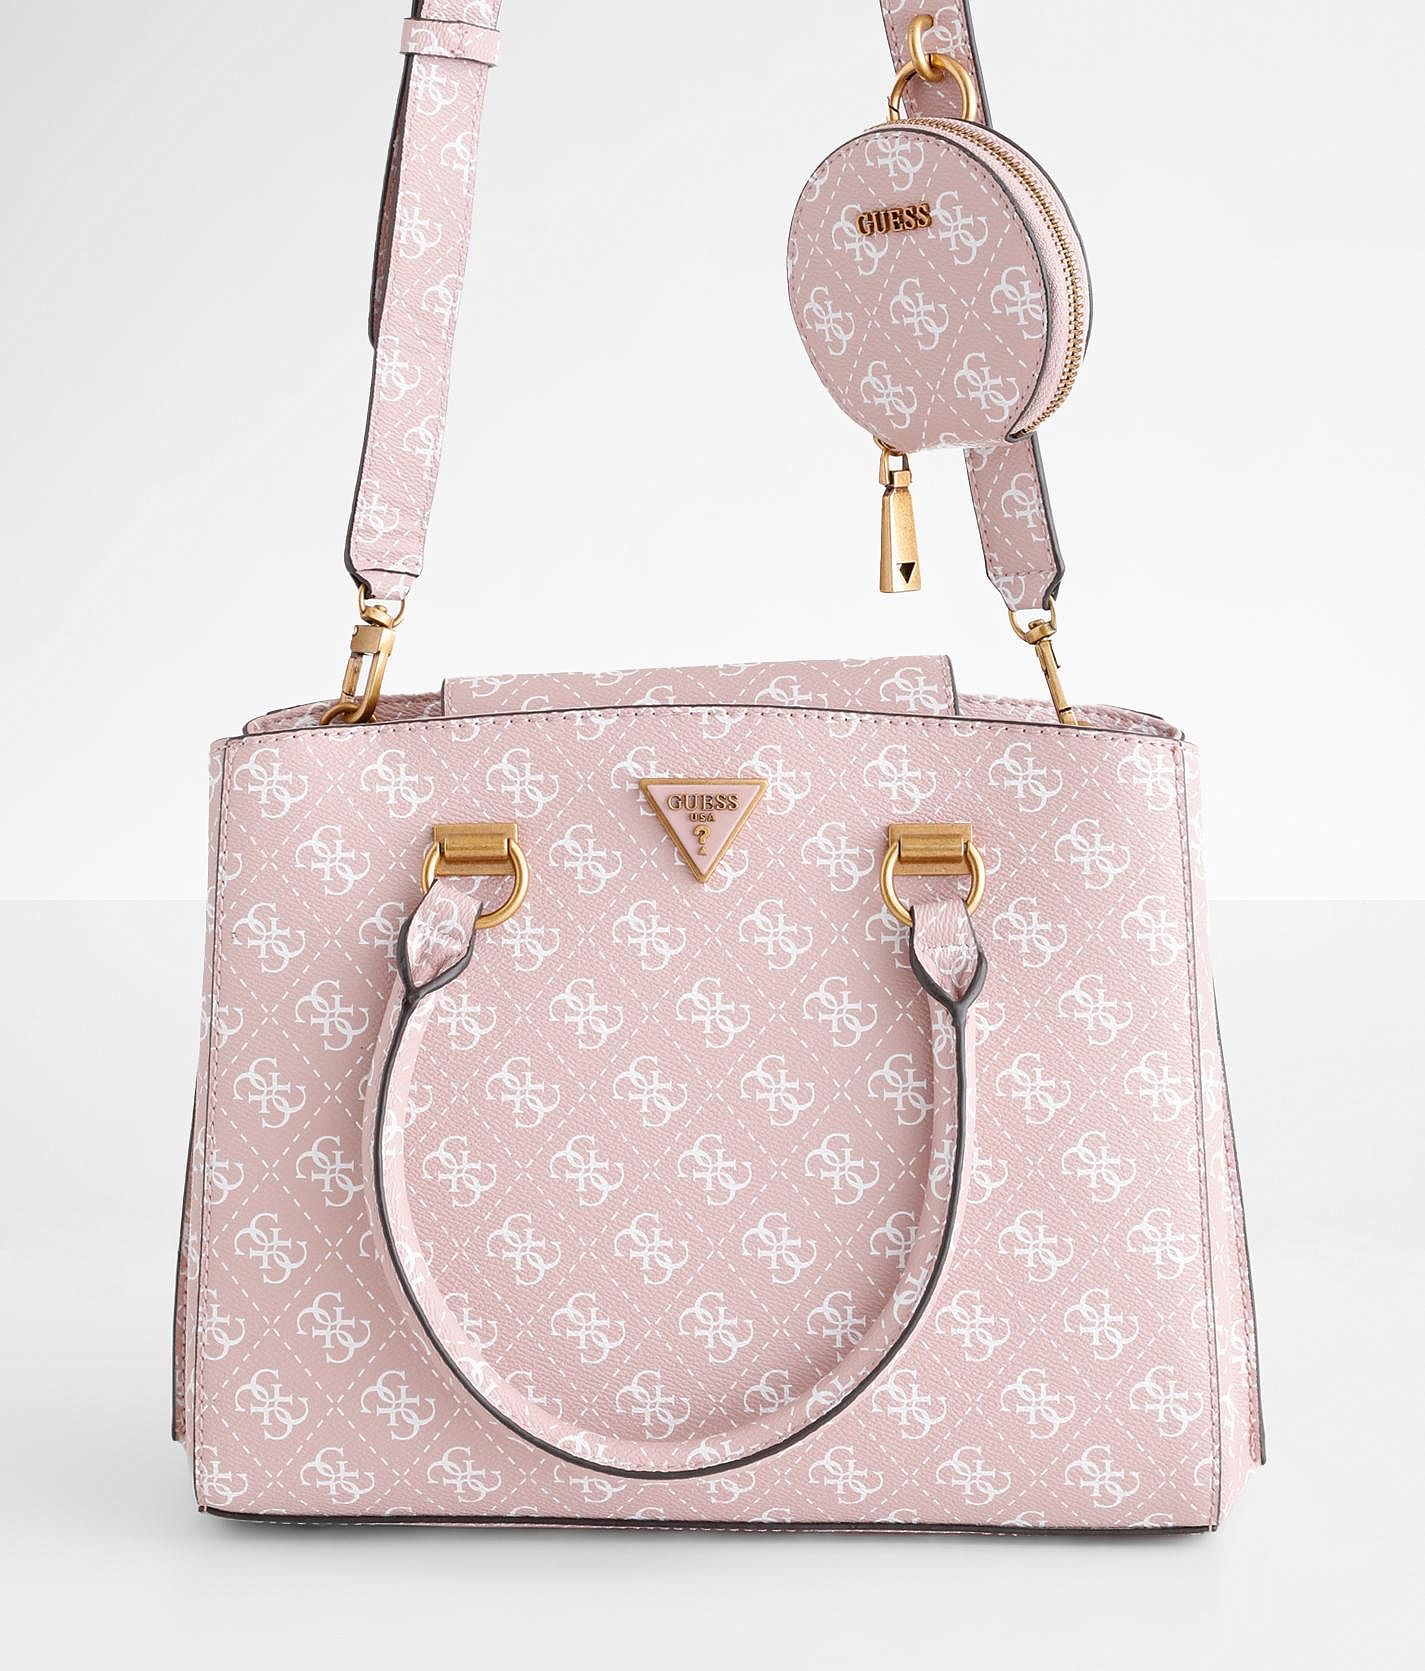 Guess Alexie Faux Leather Shoulder Bag in Pink